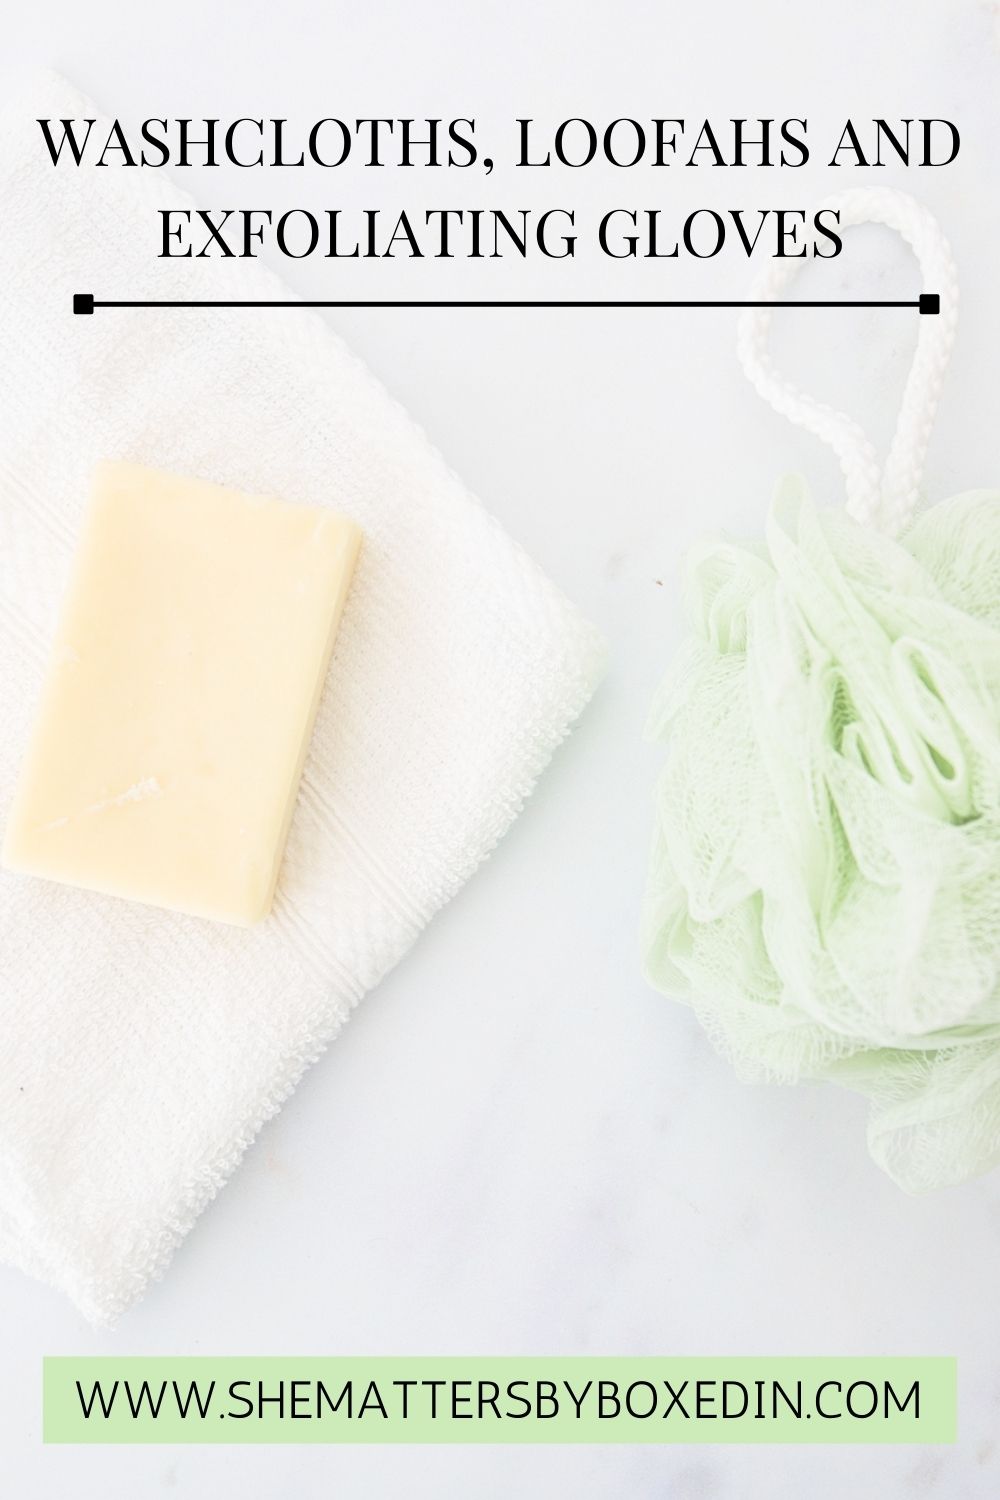 Which Do You Prefer: Washcloths, Loofahs or Exfoliating Gloves?